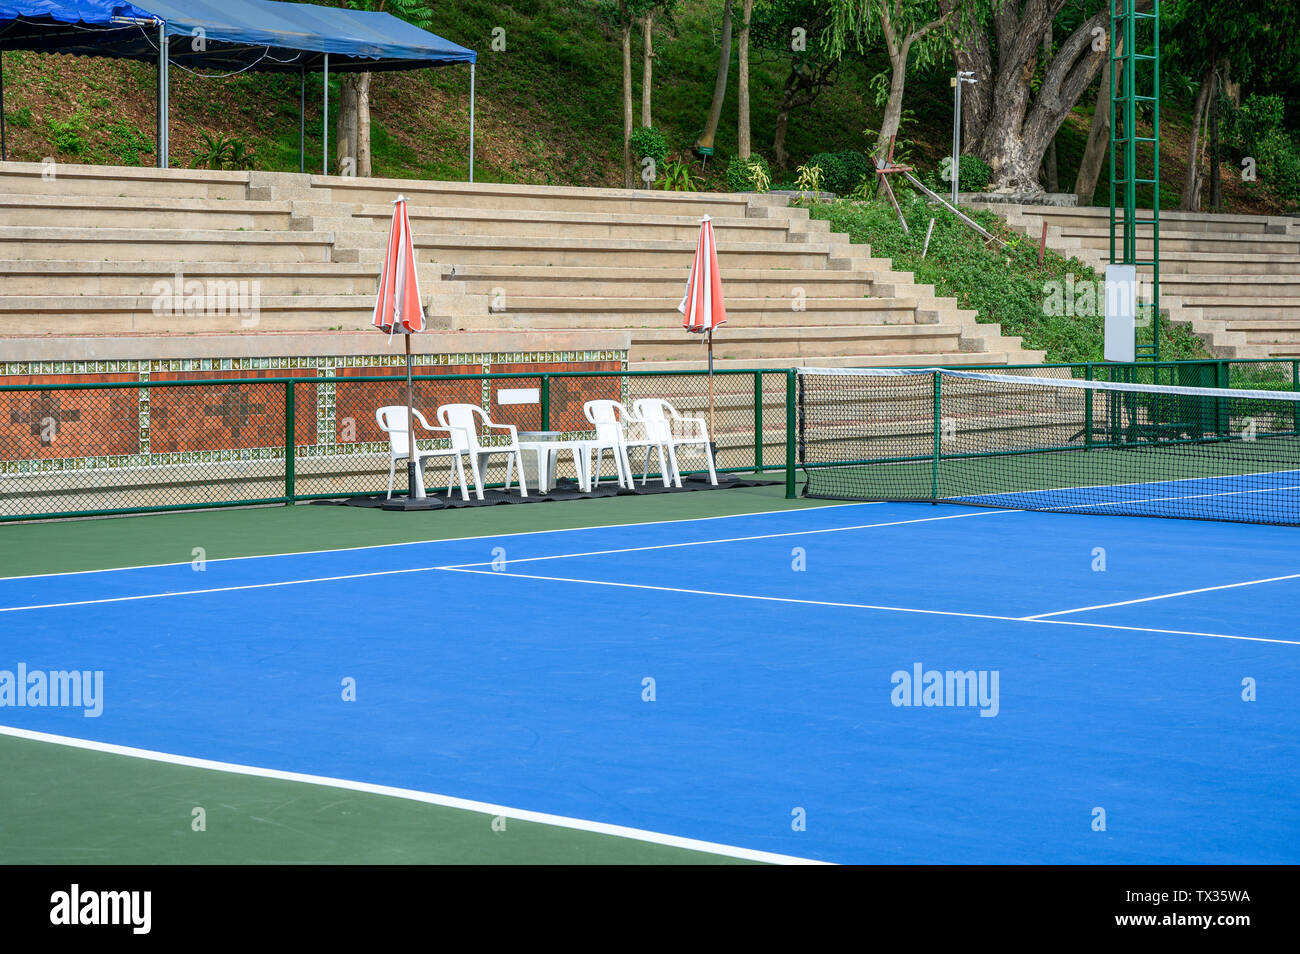 Synthetic Rubber Field In Tennis Court With Chairs And Parasols